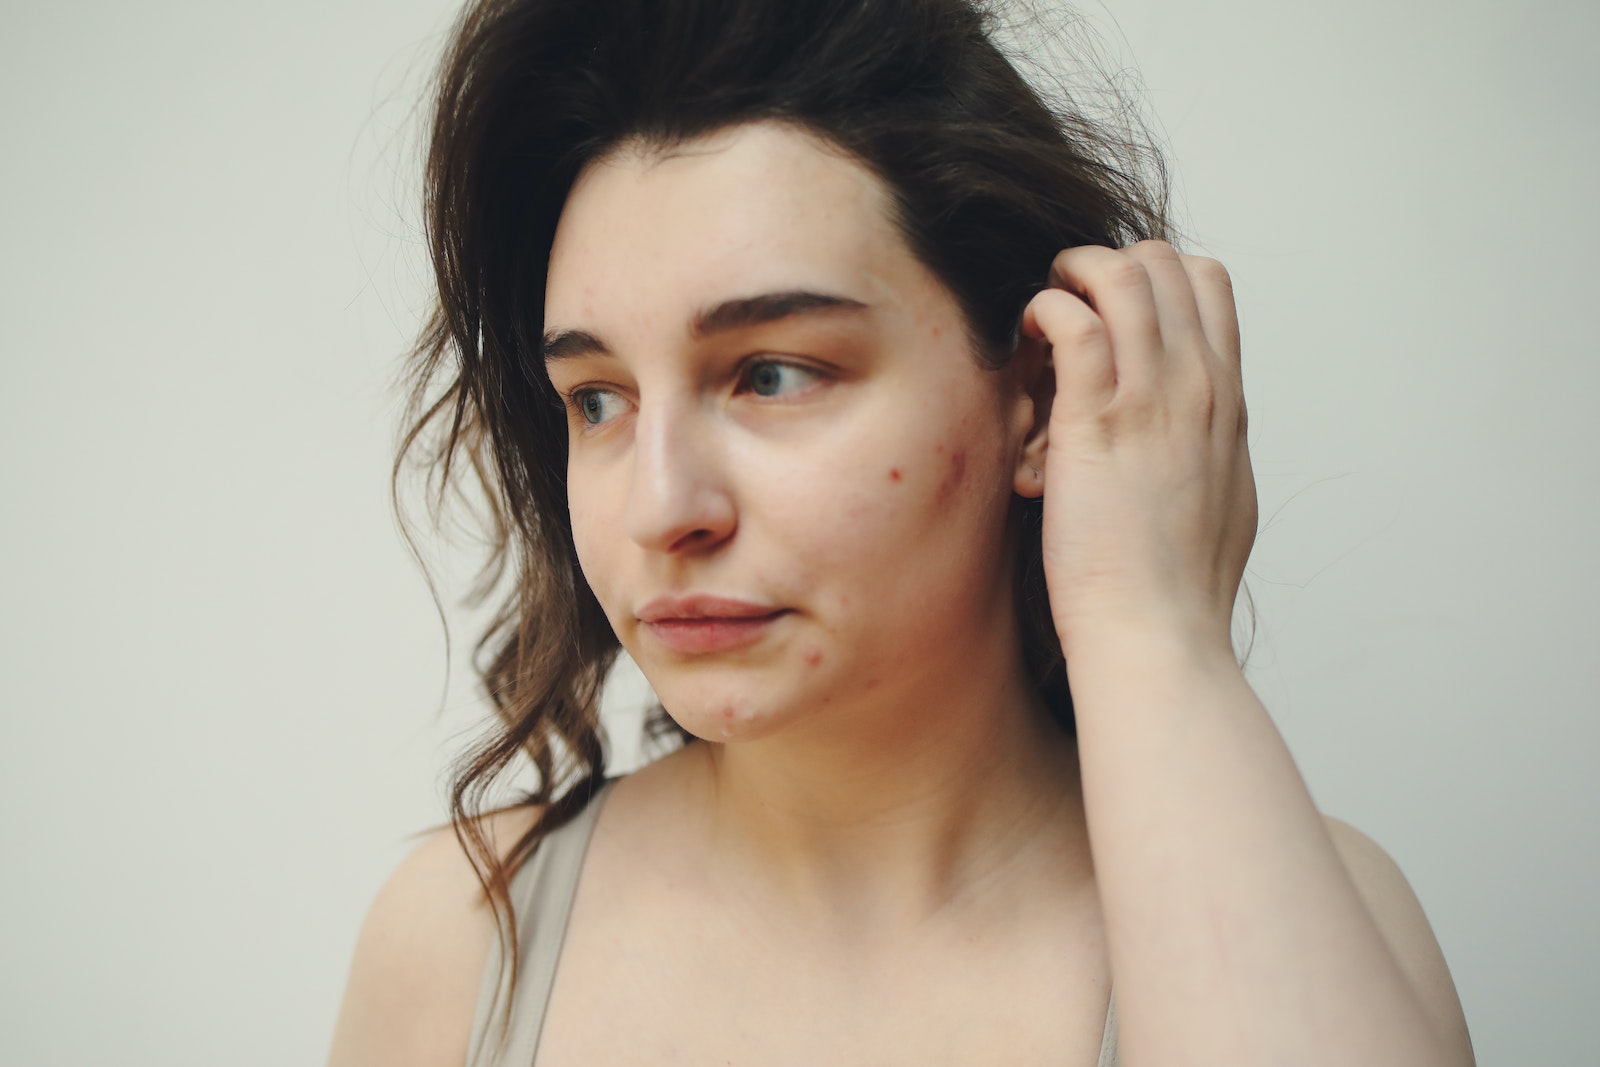 Portrait of a Woman With Acne